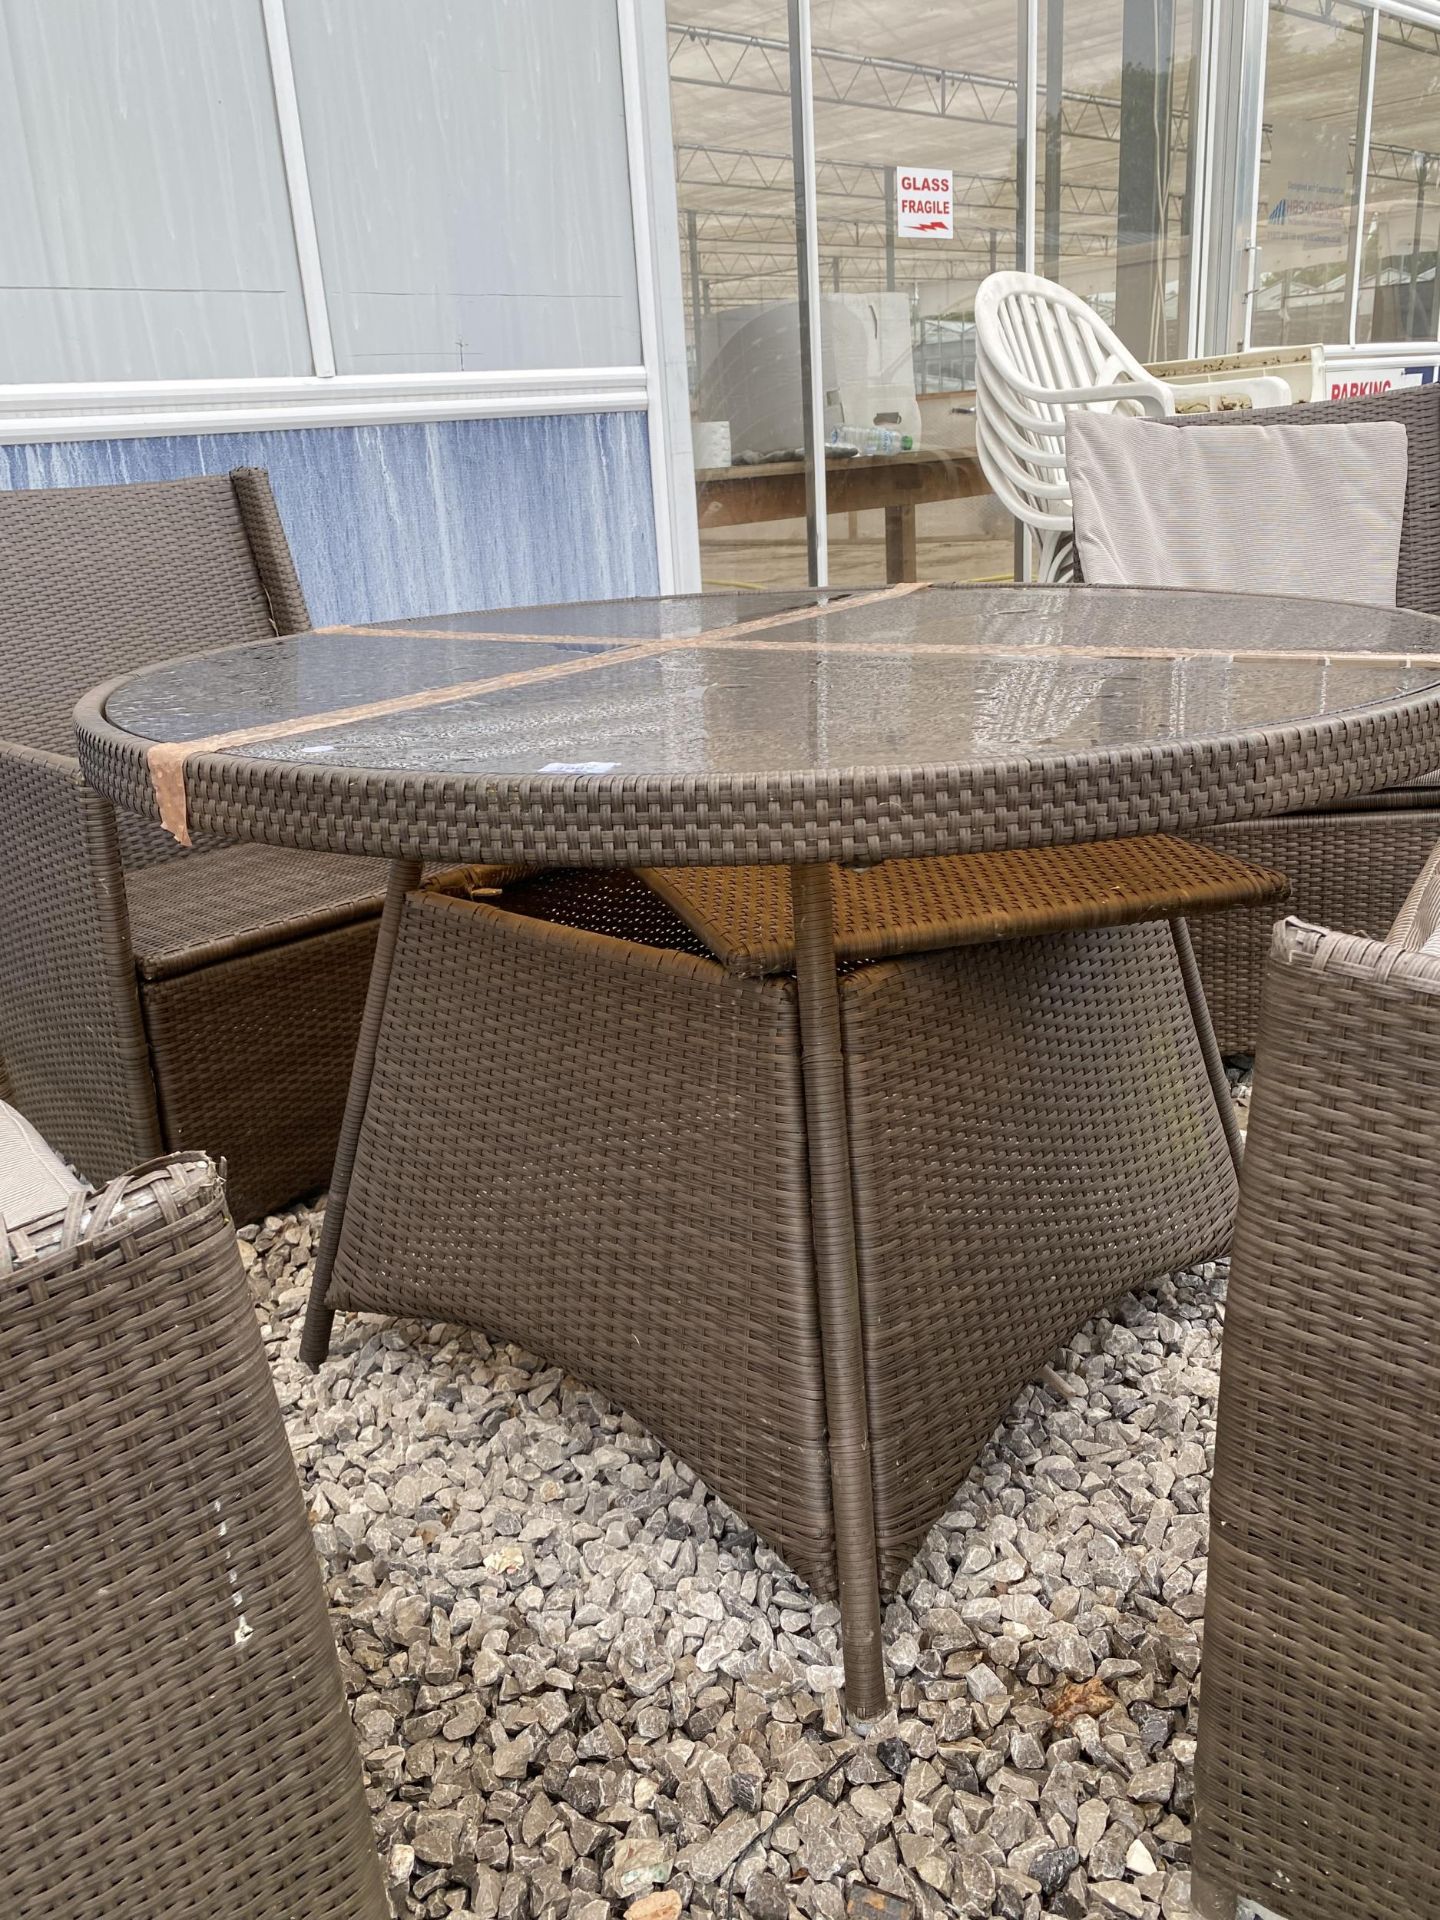 A RATTAN PATIO FURNITURE SET COMPRISING OF A ROUND TABLE AND FOUR CHAIRS - Bild 2 aus 3